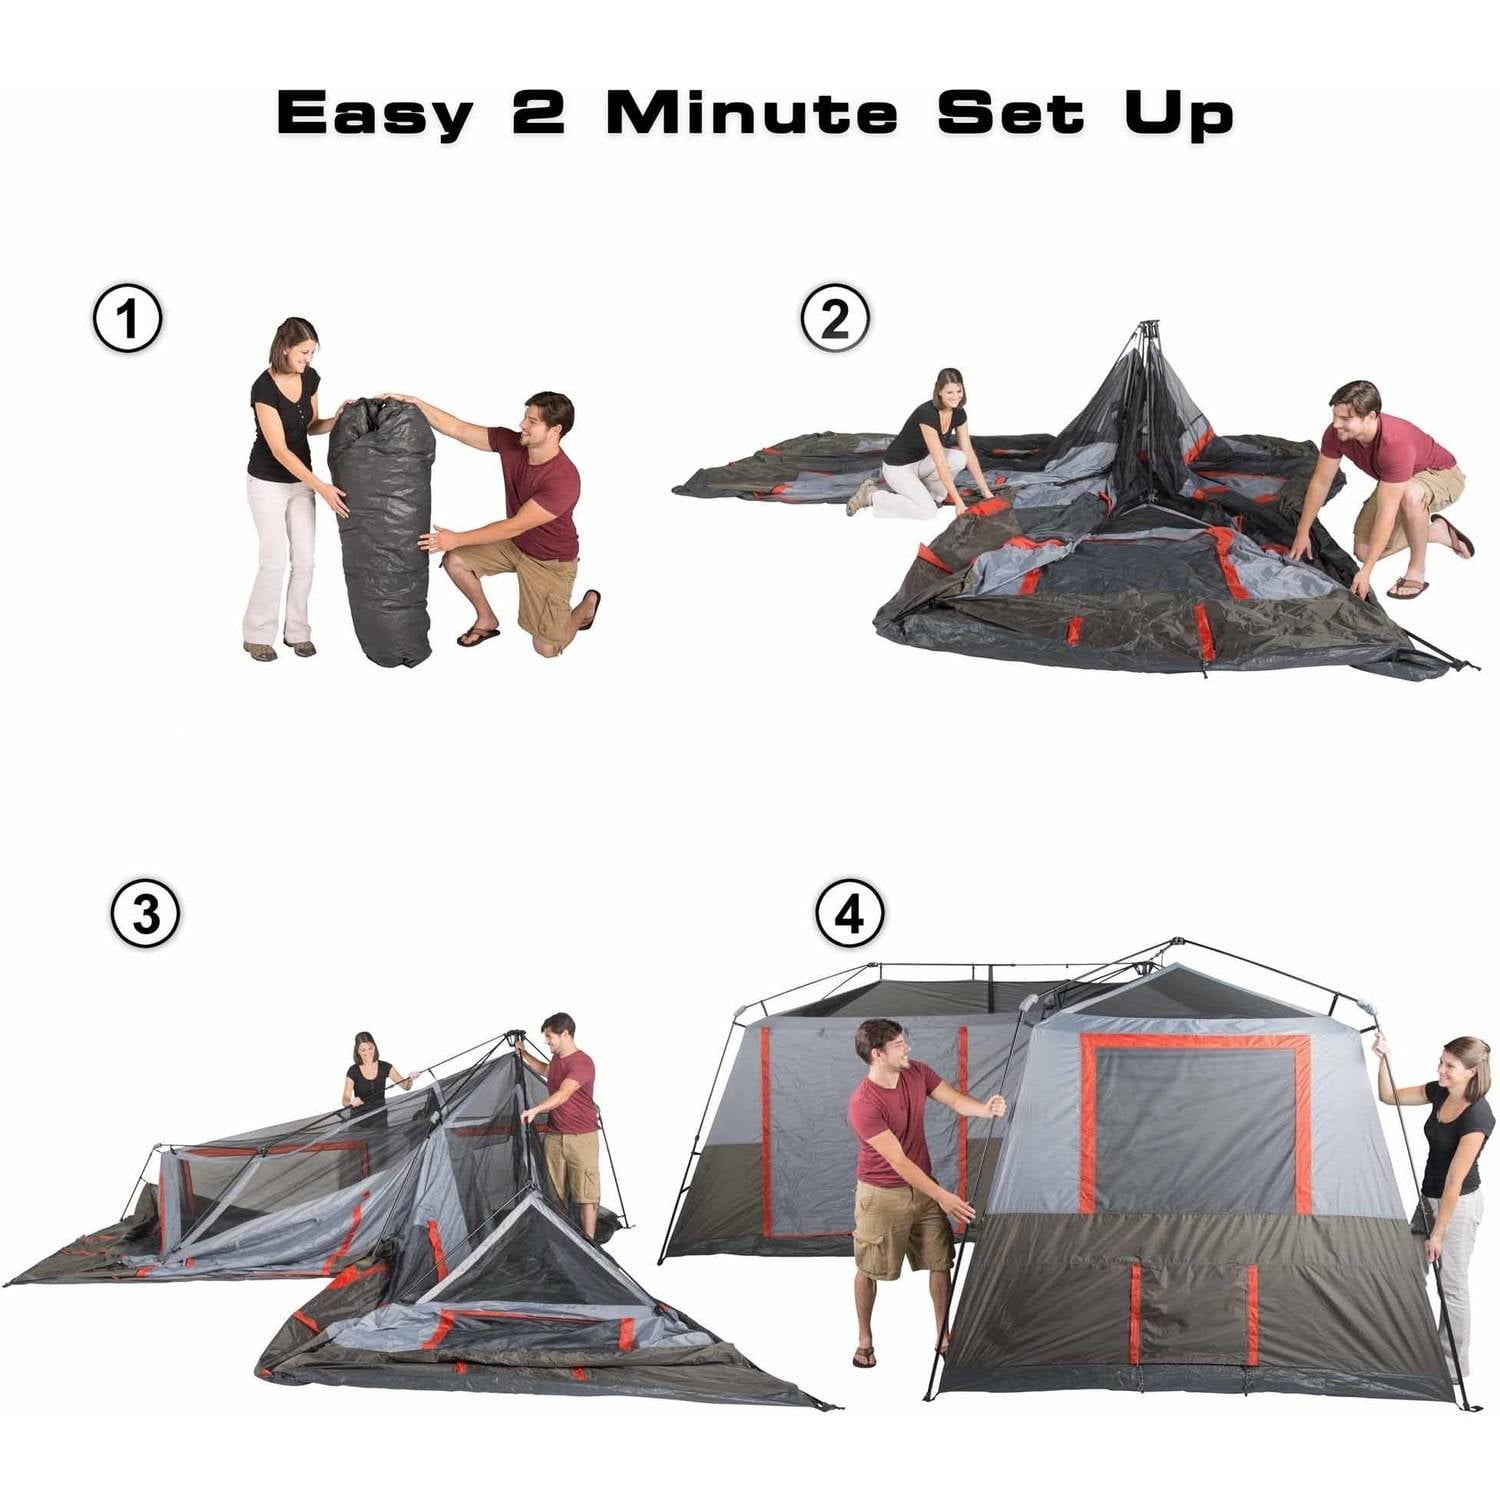 How to Setup Ozark Trail 12 Person Instant Cabin Tent?